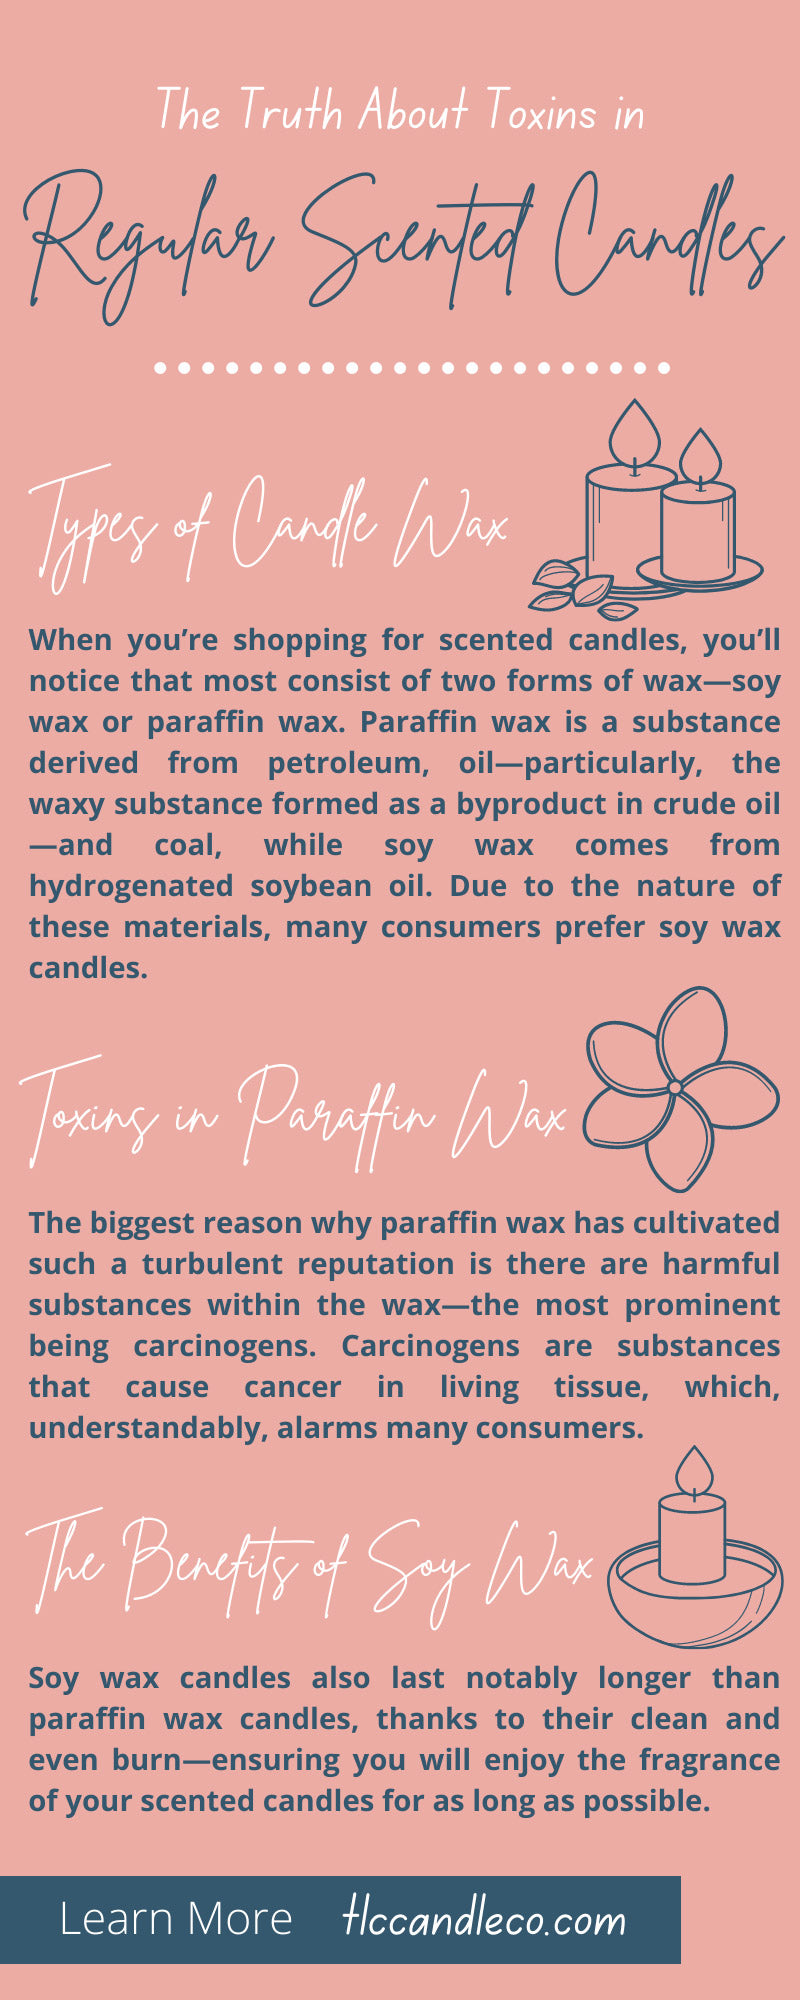 The Truth About Toxins in Regular Scented Candles